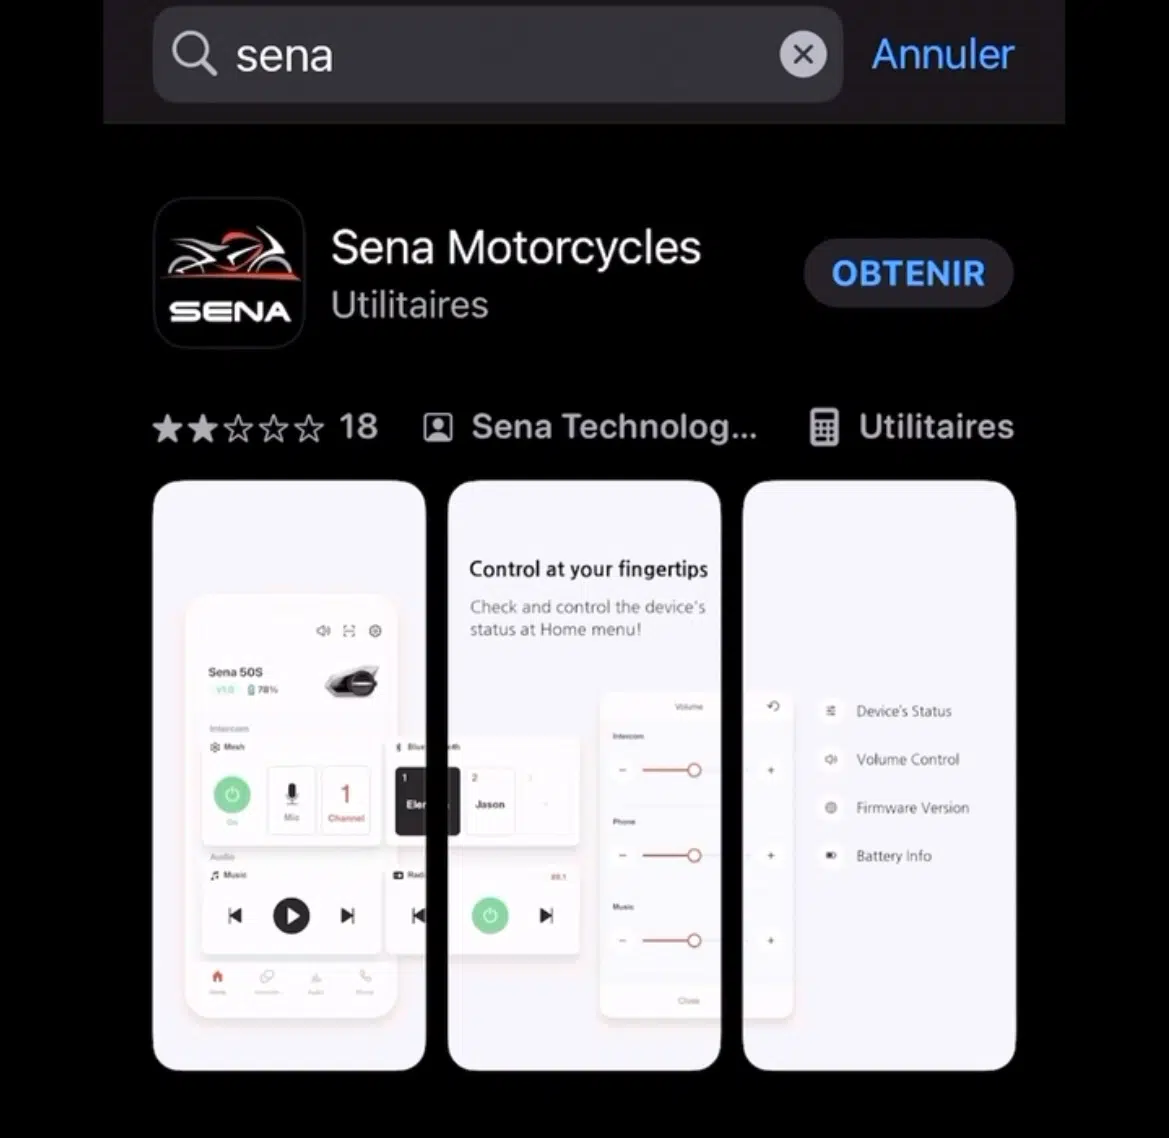 The app tells you all you need to know about your Sena